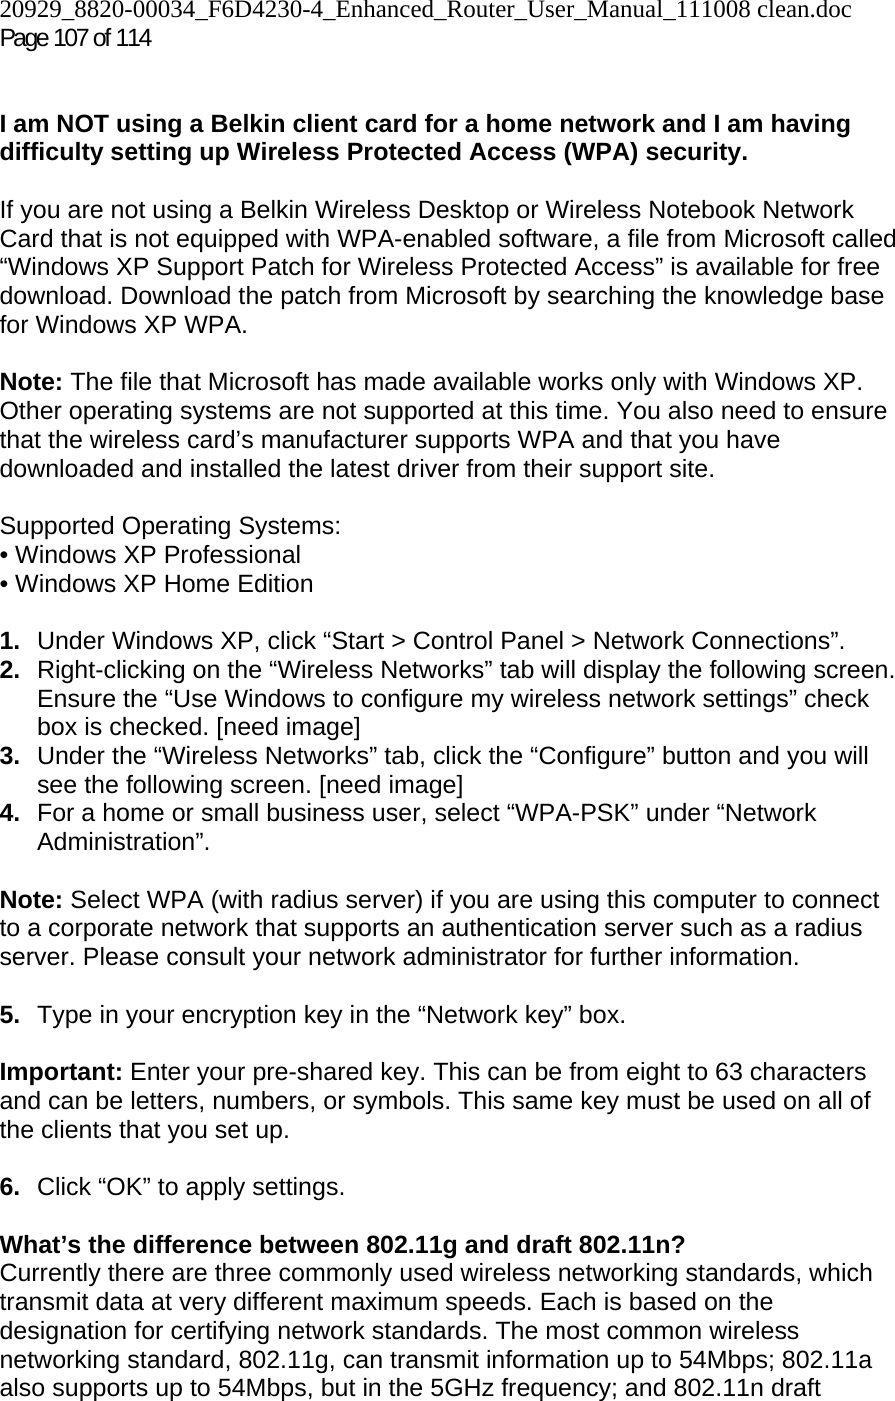 20929_8820-00034_F6D4230-4_Enhanced_Router_User_Manual_111008 clean.doc Page 107 of 114    I am NOT using a Belkin client card for a home network and I am having difficulty setting up Wireless Protected Access (WPA) security.   If you are not using a Belkin Wireless Desktop or Wireless Notebook Network Card that is not equipped with WPA-enabled software, a file from Microsoft called “Windows XP Support Patch for Wireless Protected Access” is available for free download. Download the patch from Microsoft by searching the knowledge base for Windows XP WPA.  Note: The file that Microsoft has made available works only with Windows XP. Other operating systems are not supported at this time. You also need to ensure that the wireless card’s manufacturer supports WPA and that you have downloaded and installed the latest driver from their support site.  Supported Operating Systems: • Windows XP Professional  • Windows XP Home Edition  1.  Under Windows XP, click “Start &gt; Control Panel &gt; Network Connections”. 2.  Right-clicking on the “Wireless Networks” tab will display the following screen. Ensure the “Use Windows to configure my wireless network settings” check box is checked. [need image] 3.  Under the “Wireless Networks” tab, click the “Configure” button and you will see the following screen. [need image] 4.  For a home or small business user, select “WPA-PSK” under “Network Administration”.   Note: Select WPA (with radius server) if you are using this computer to connect to a corporate network that supports an authentication server such as a radius server. Please consult your network administrator for further information. 5.  Type in your encryption key in the “Network key” box.   Important: Enter your pre-shared key. This can be from eight to 63 characters and can be letters, numbers, or symbols. This same key must be used on all of the clients that you set up.  6.  Click “OK” to apply settings. What’s the difference between 802.11g and draft 802.11n? Currently there are three commonly used wireless networking standards, which transmit data at very different maximum speeds. Each is based on the designation for certifying network standards. The most common wireless networking standard, 802.11g, can transmit information up to 54Mbps; 802.11a also supports up to 54Mbps, but in the 5GHz frequency; and 802.11n draft 